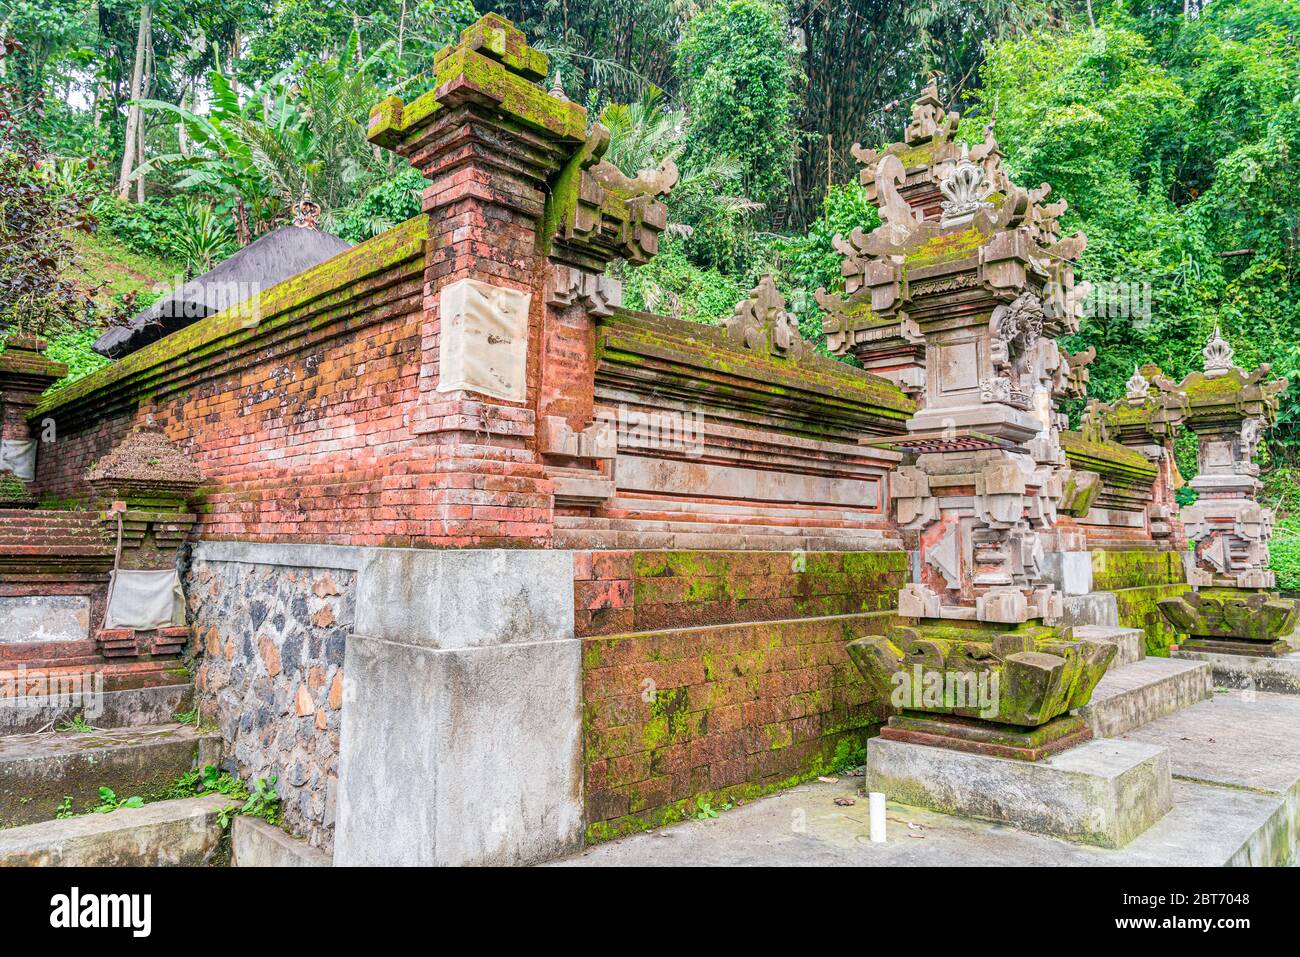 Traditional Balinesian temple in a forest at a side of rice terrace plantation, Ubud Bali Stock Photo